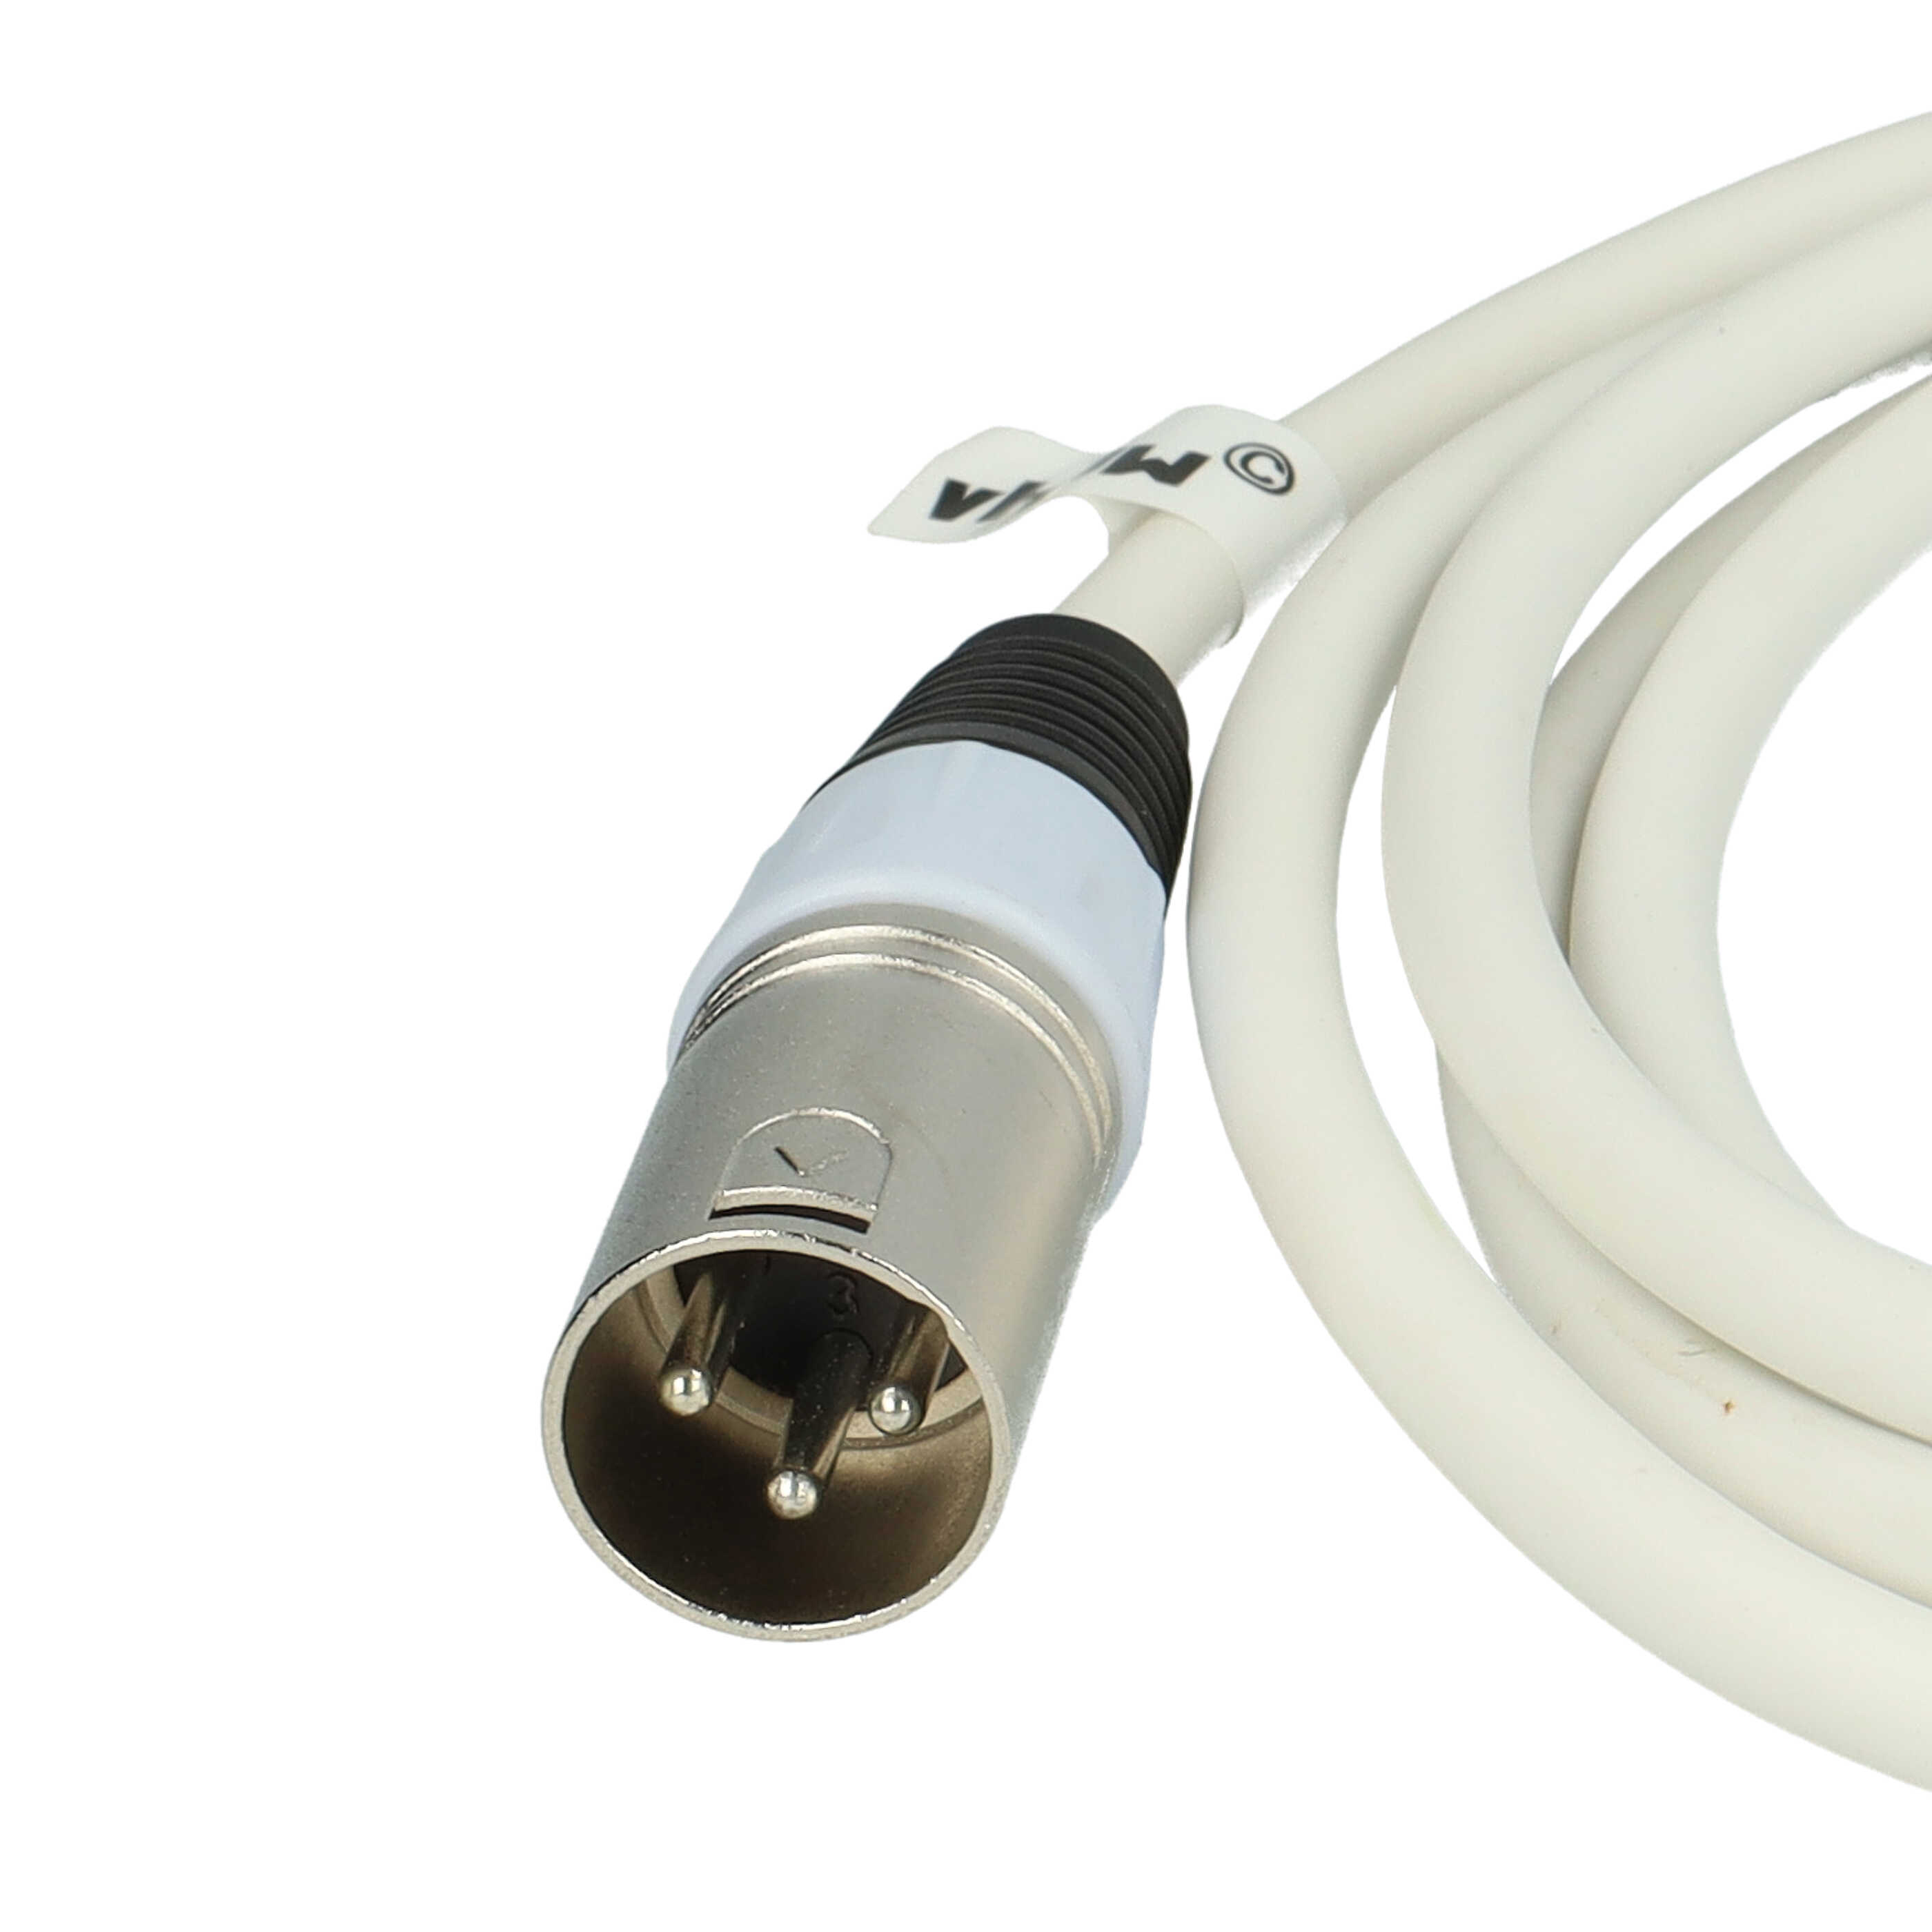 vhbw DMX Cable XLR Male Plug to XLR Female Socket compatible with Spotlights, Stage Lighting, Party Lights - 3